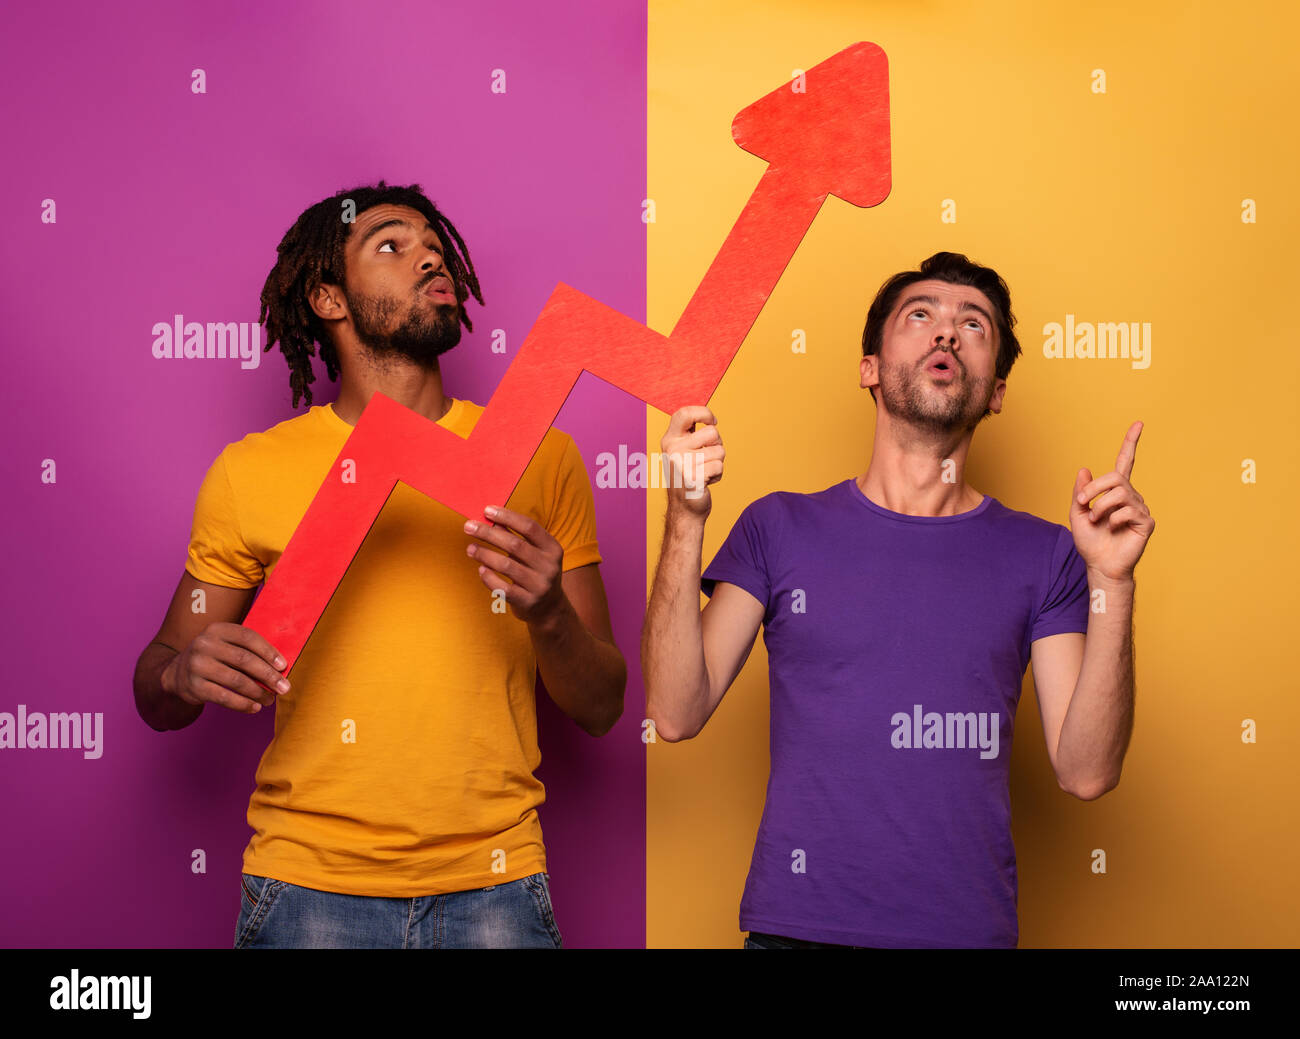 Amazed friends with funny face expression and red arrow statistic. Concept of growth, success, earn. Stock Photo